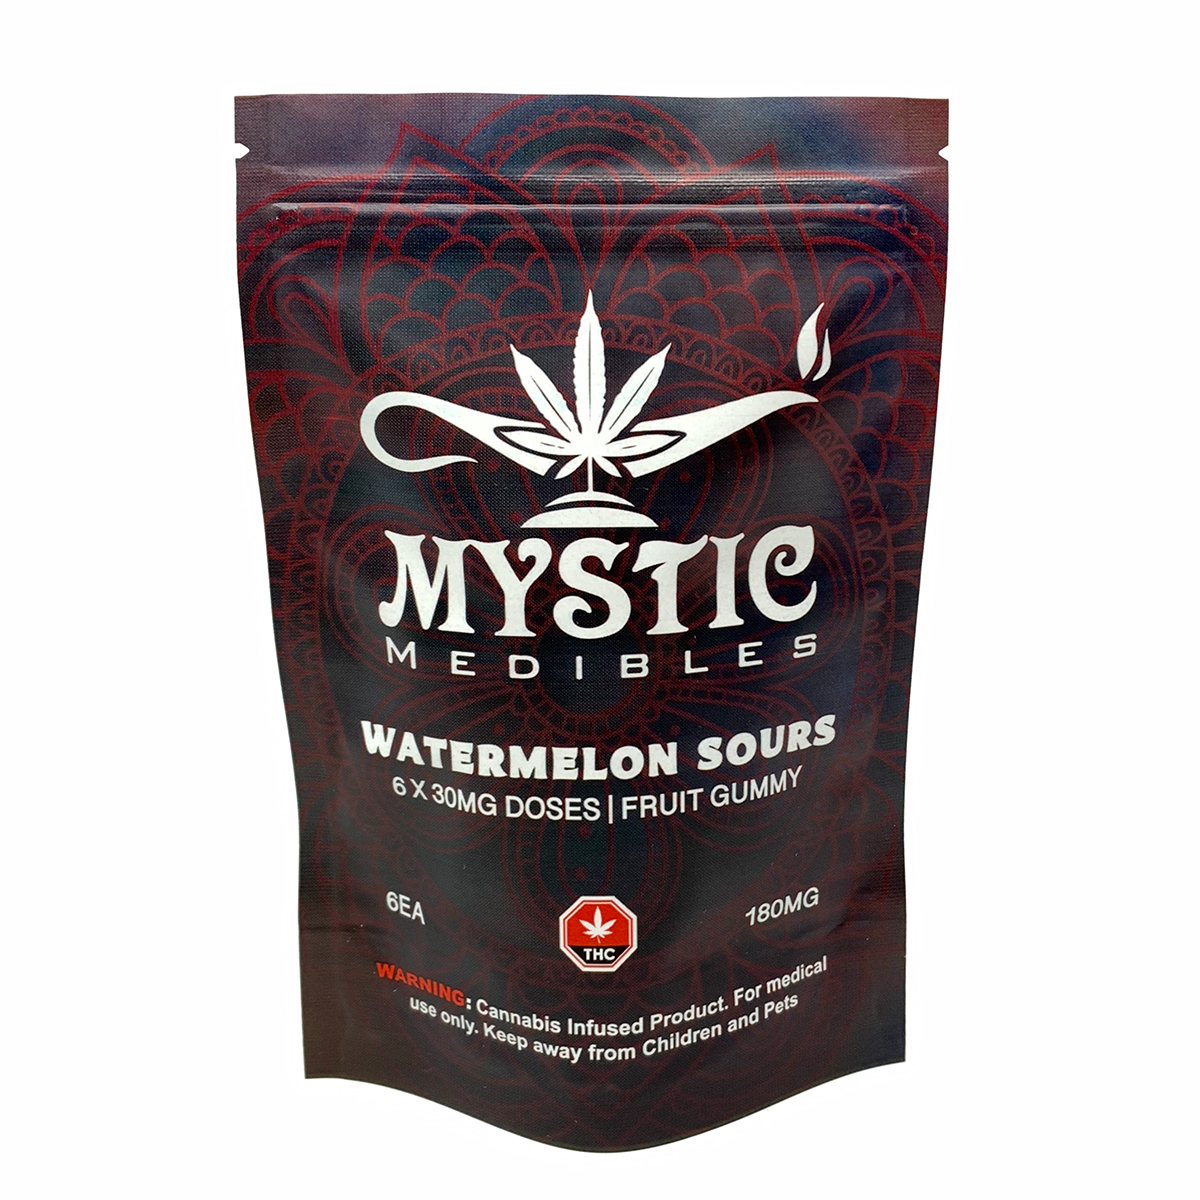 Buy Mystic Medibles - Watermelon Sours 180mg Online